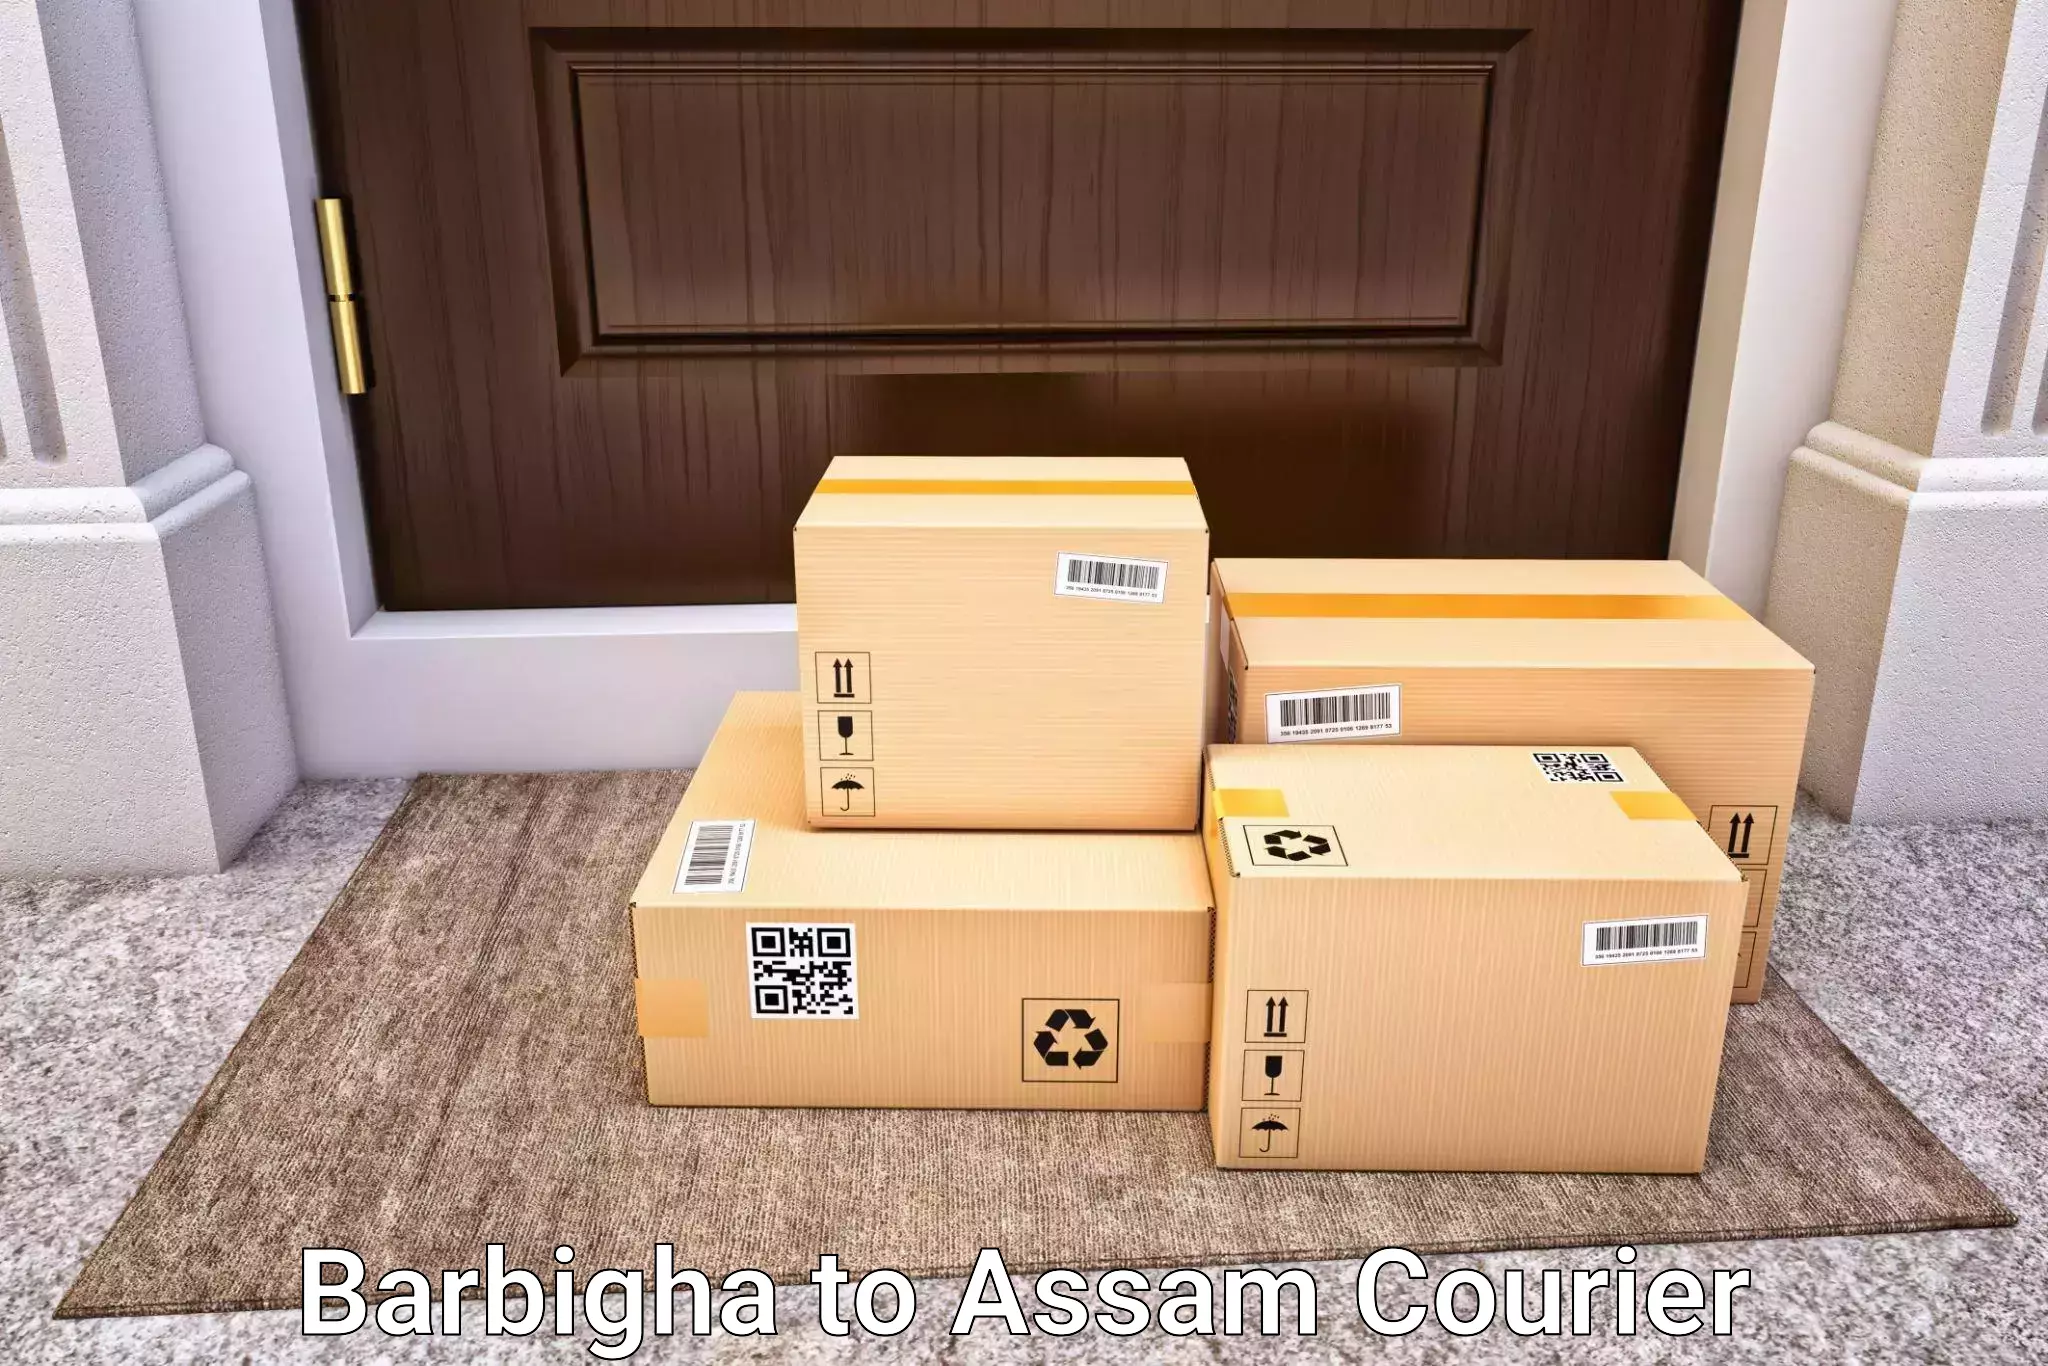 Professional baggage transport in Barbigha to Assam